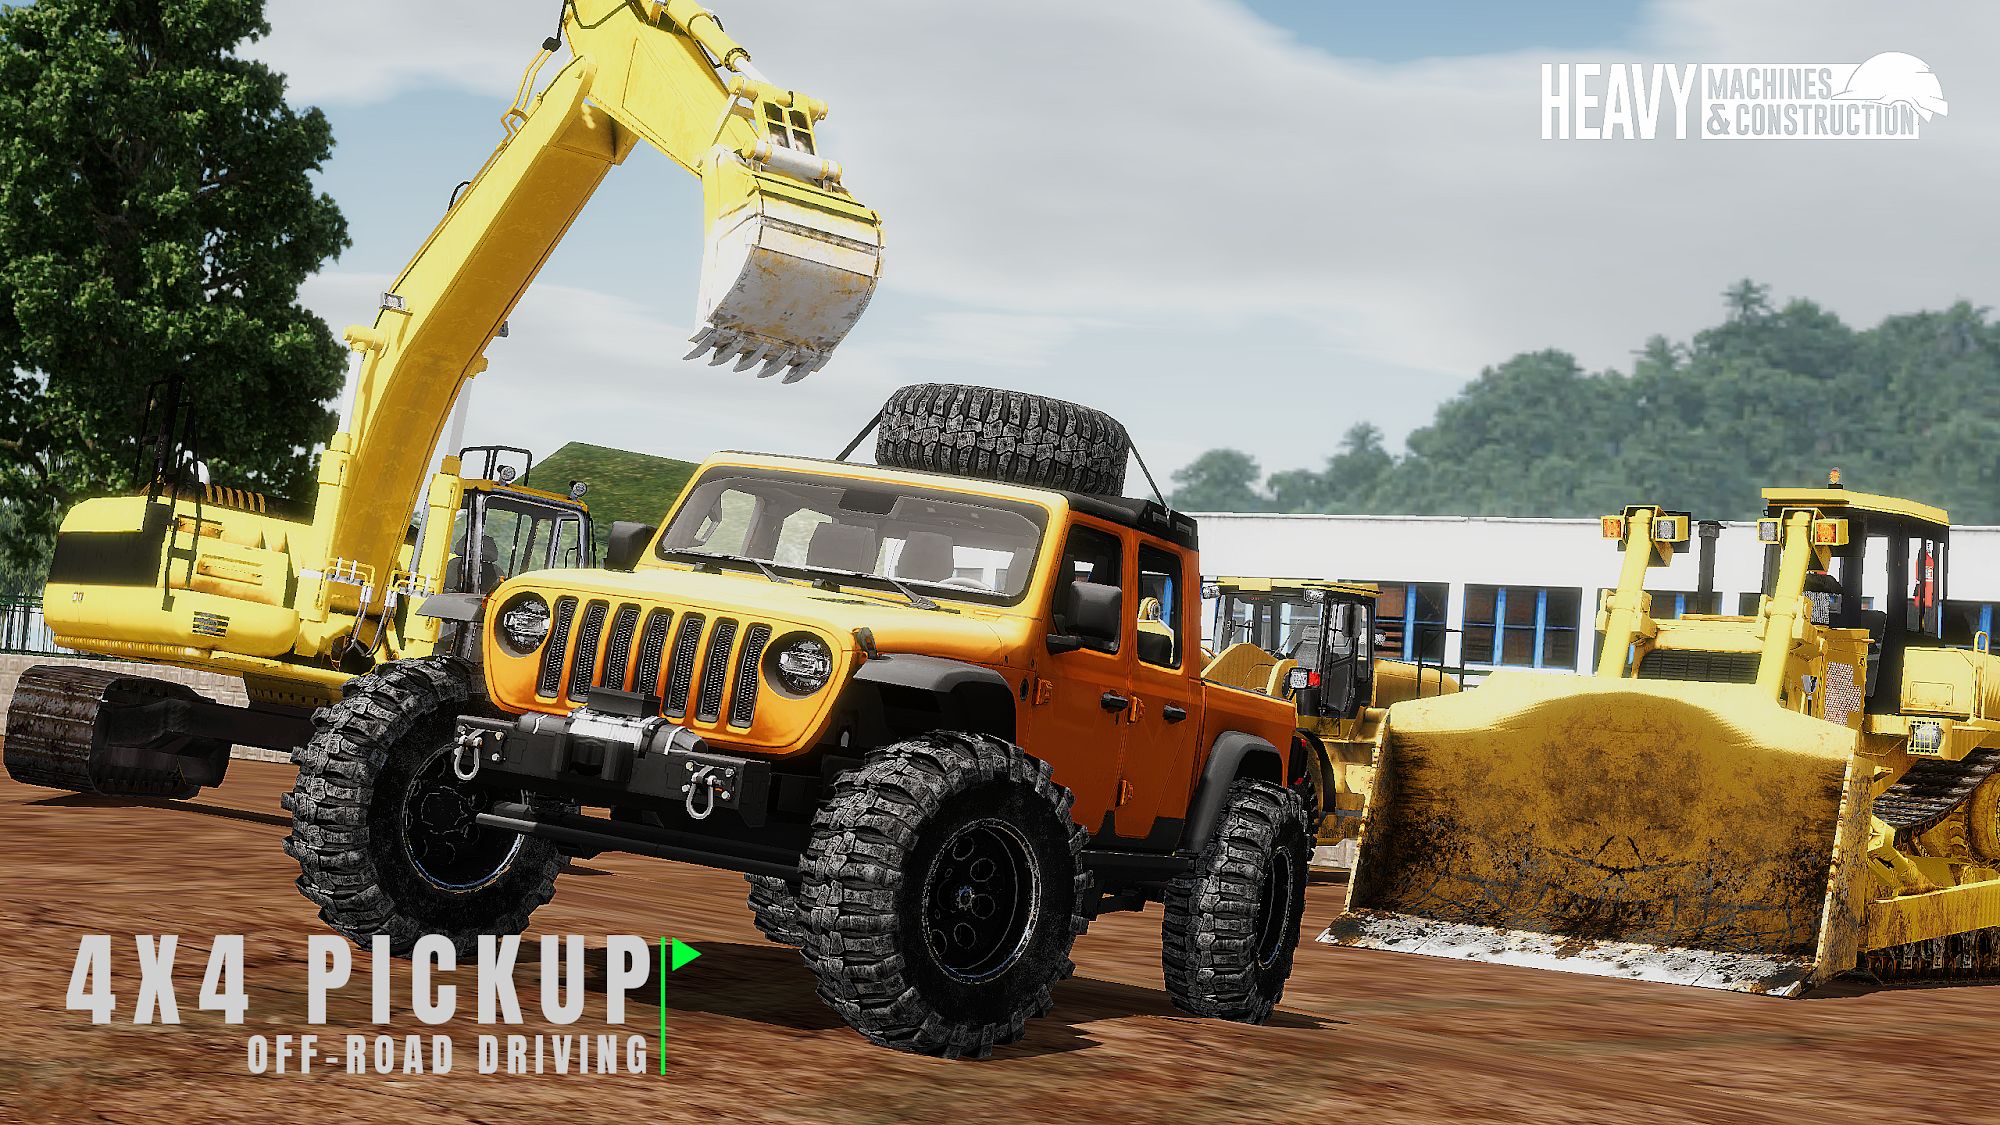 Full version of Android Trucks game apk Heavy Machines & Construction for tablet and phone.